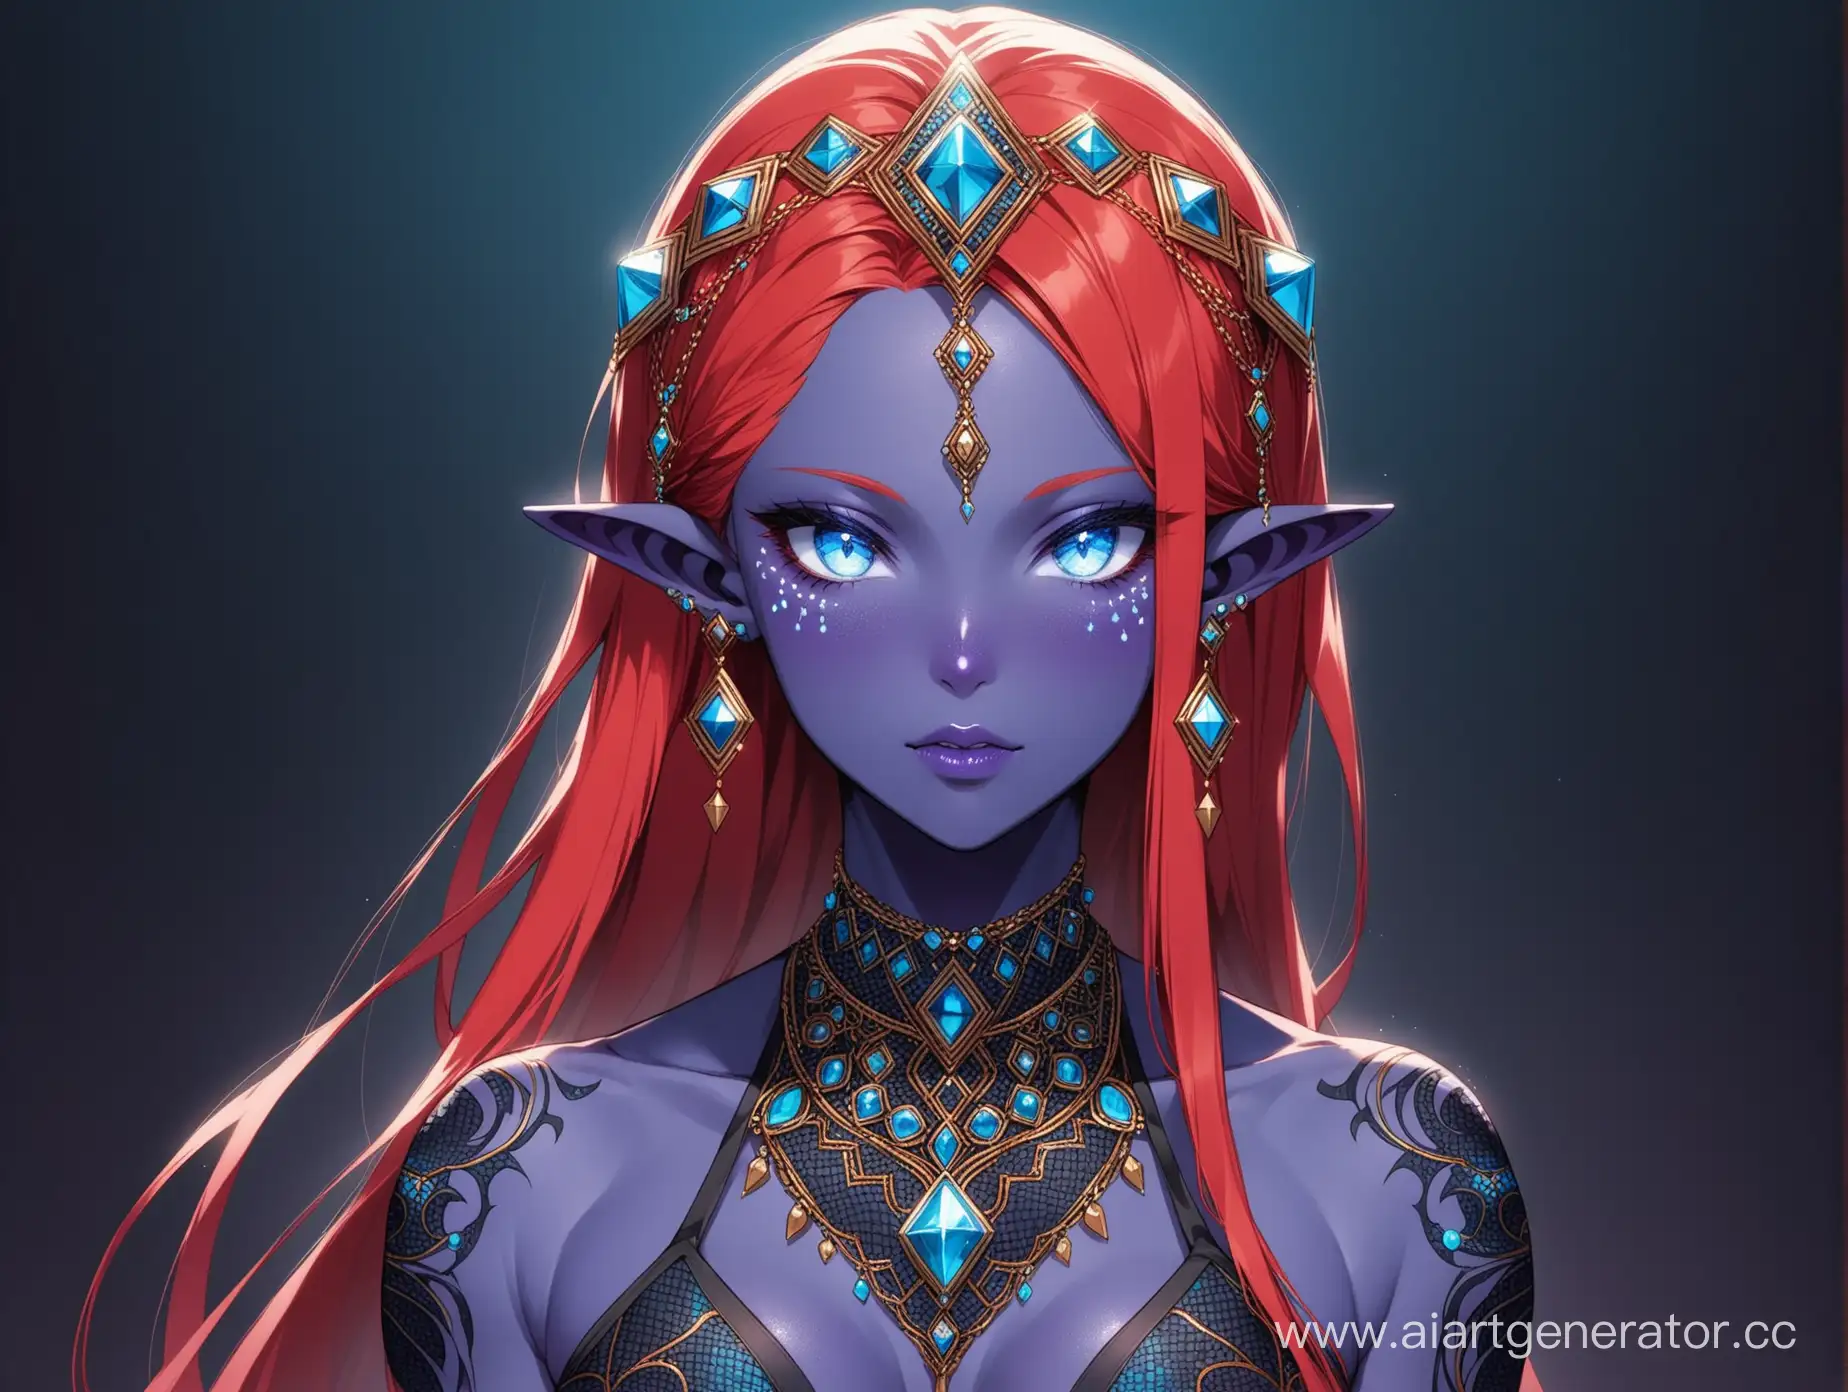 A girl with purple skin, sharp ears, long red hair, and beautiful blue eyes. She has a sexy athletic body. She wears a decoration of precious stones on her head, and clothing of thin dark fabric with various patterns on her body.